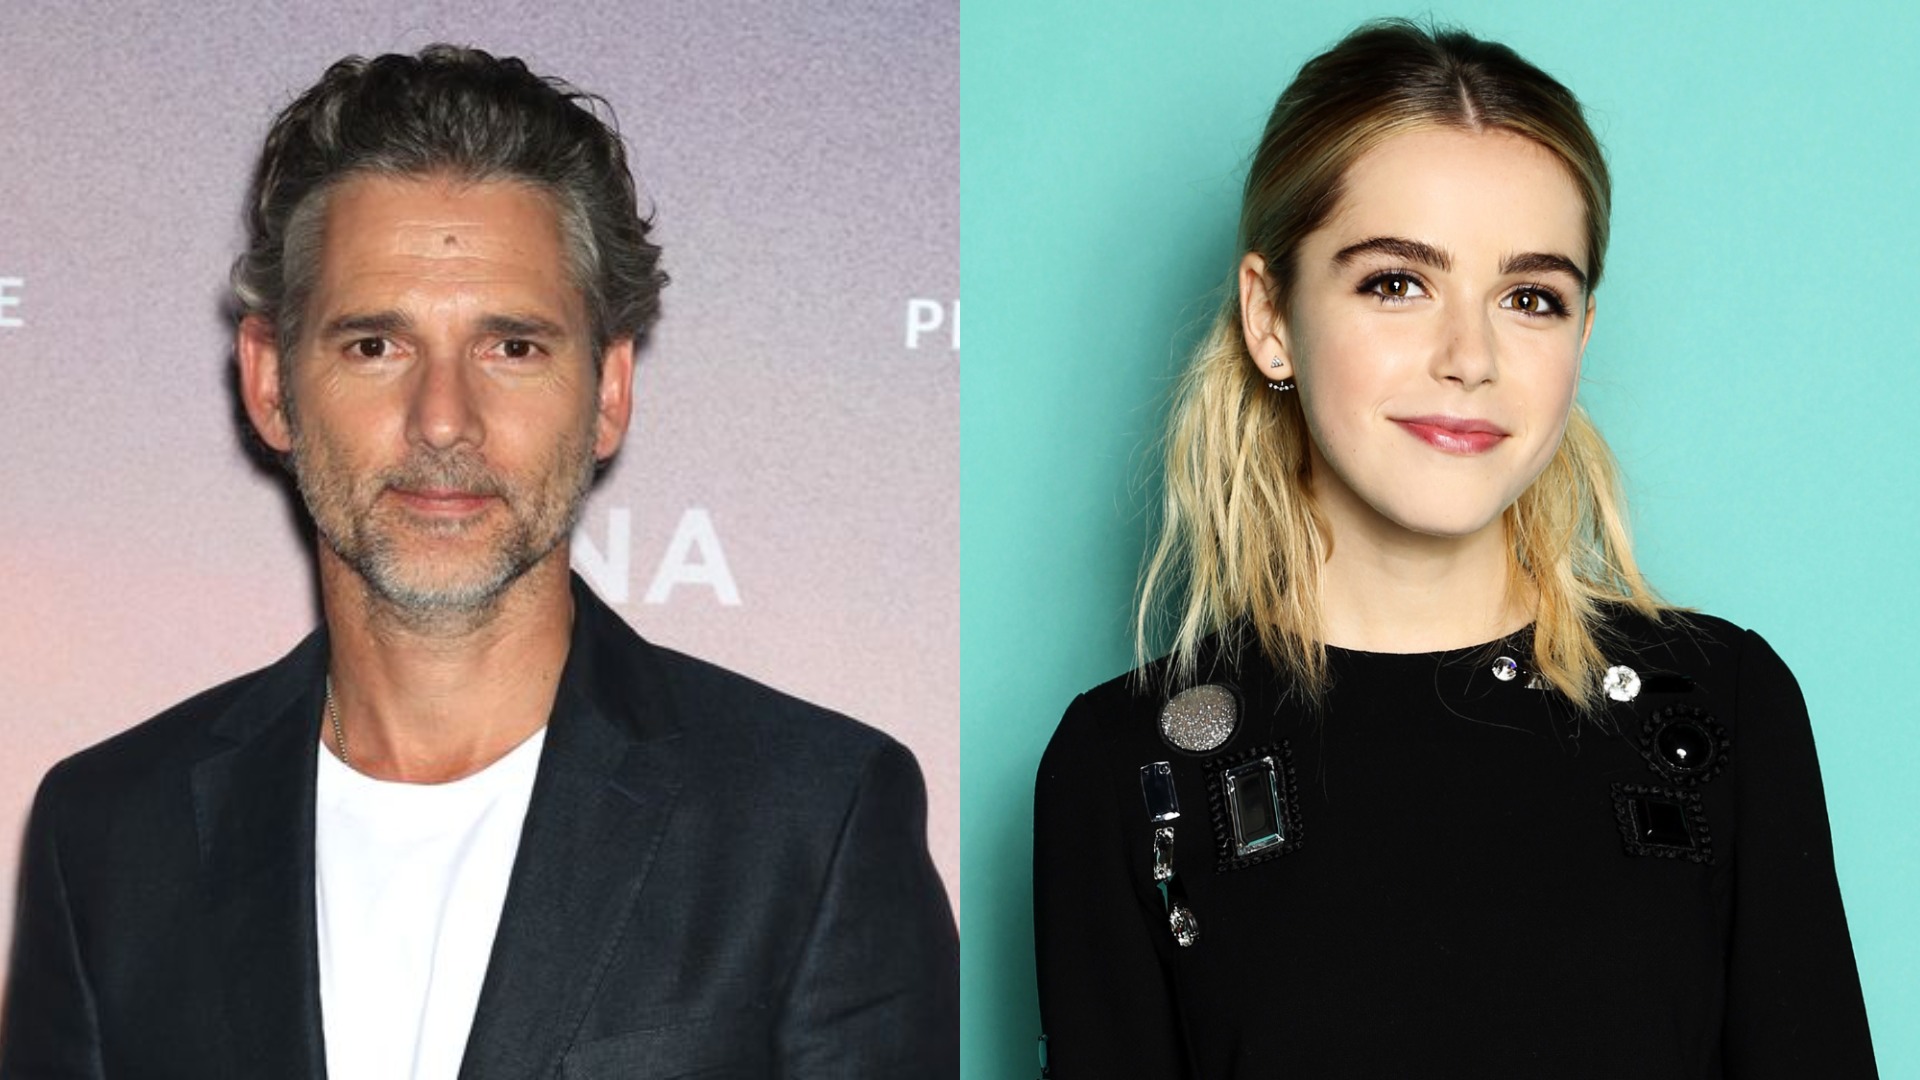 Erica Bana and Kiernan Shipka have signed up to star in the upcoming thriller Berlin Nobody.